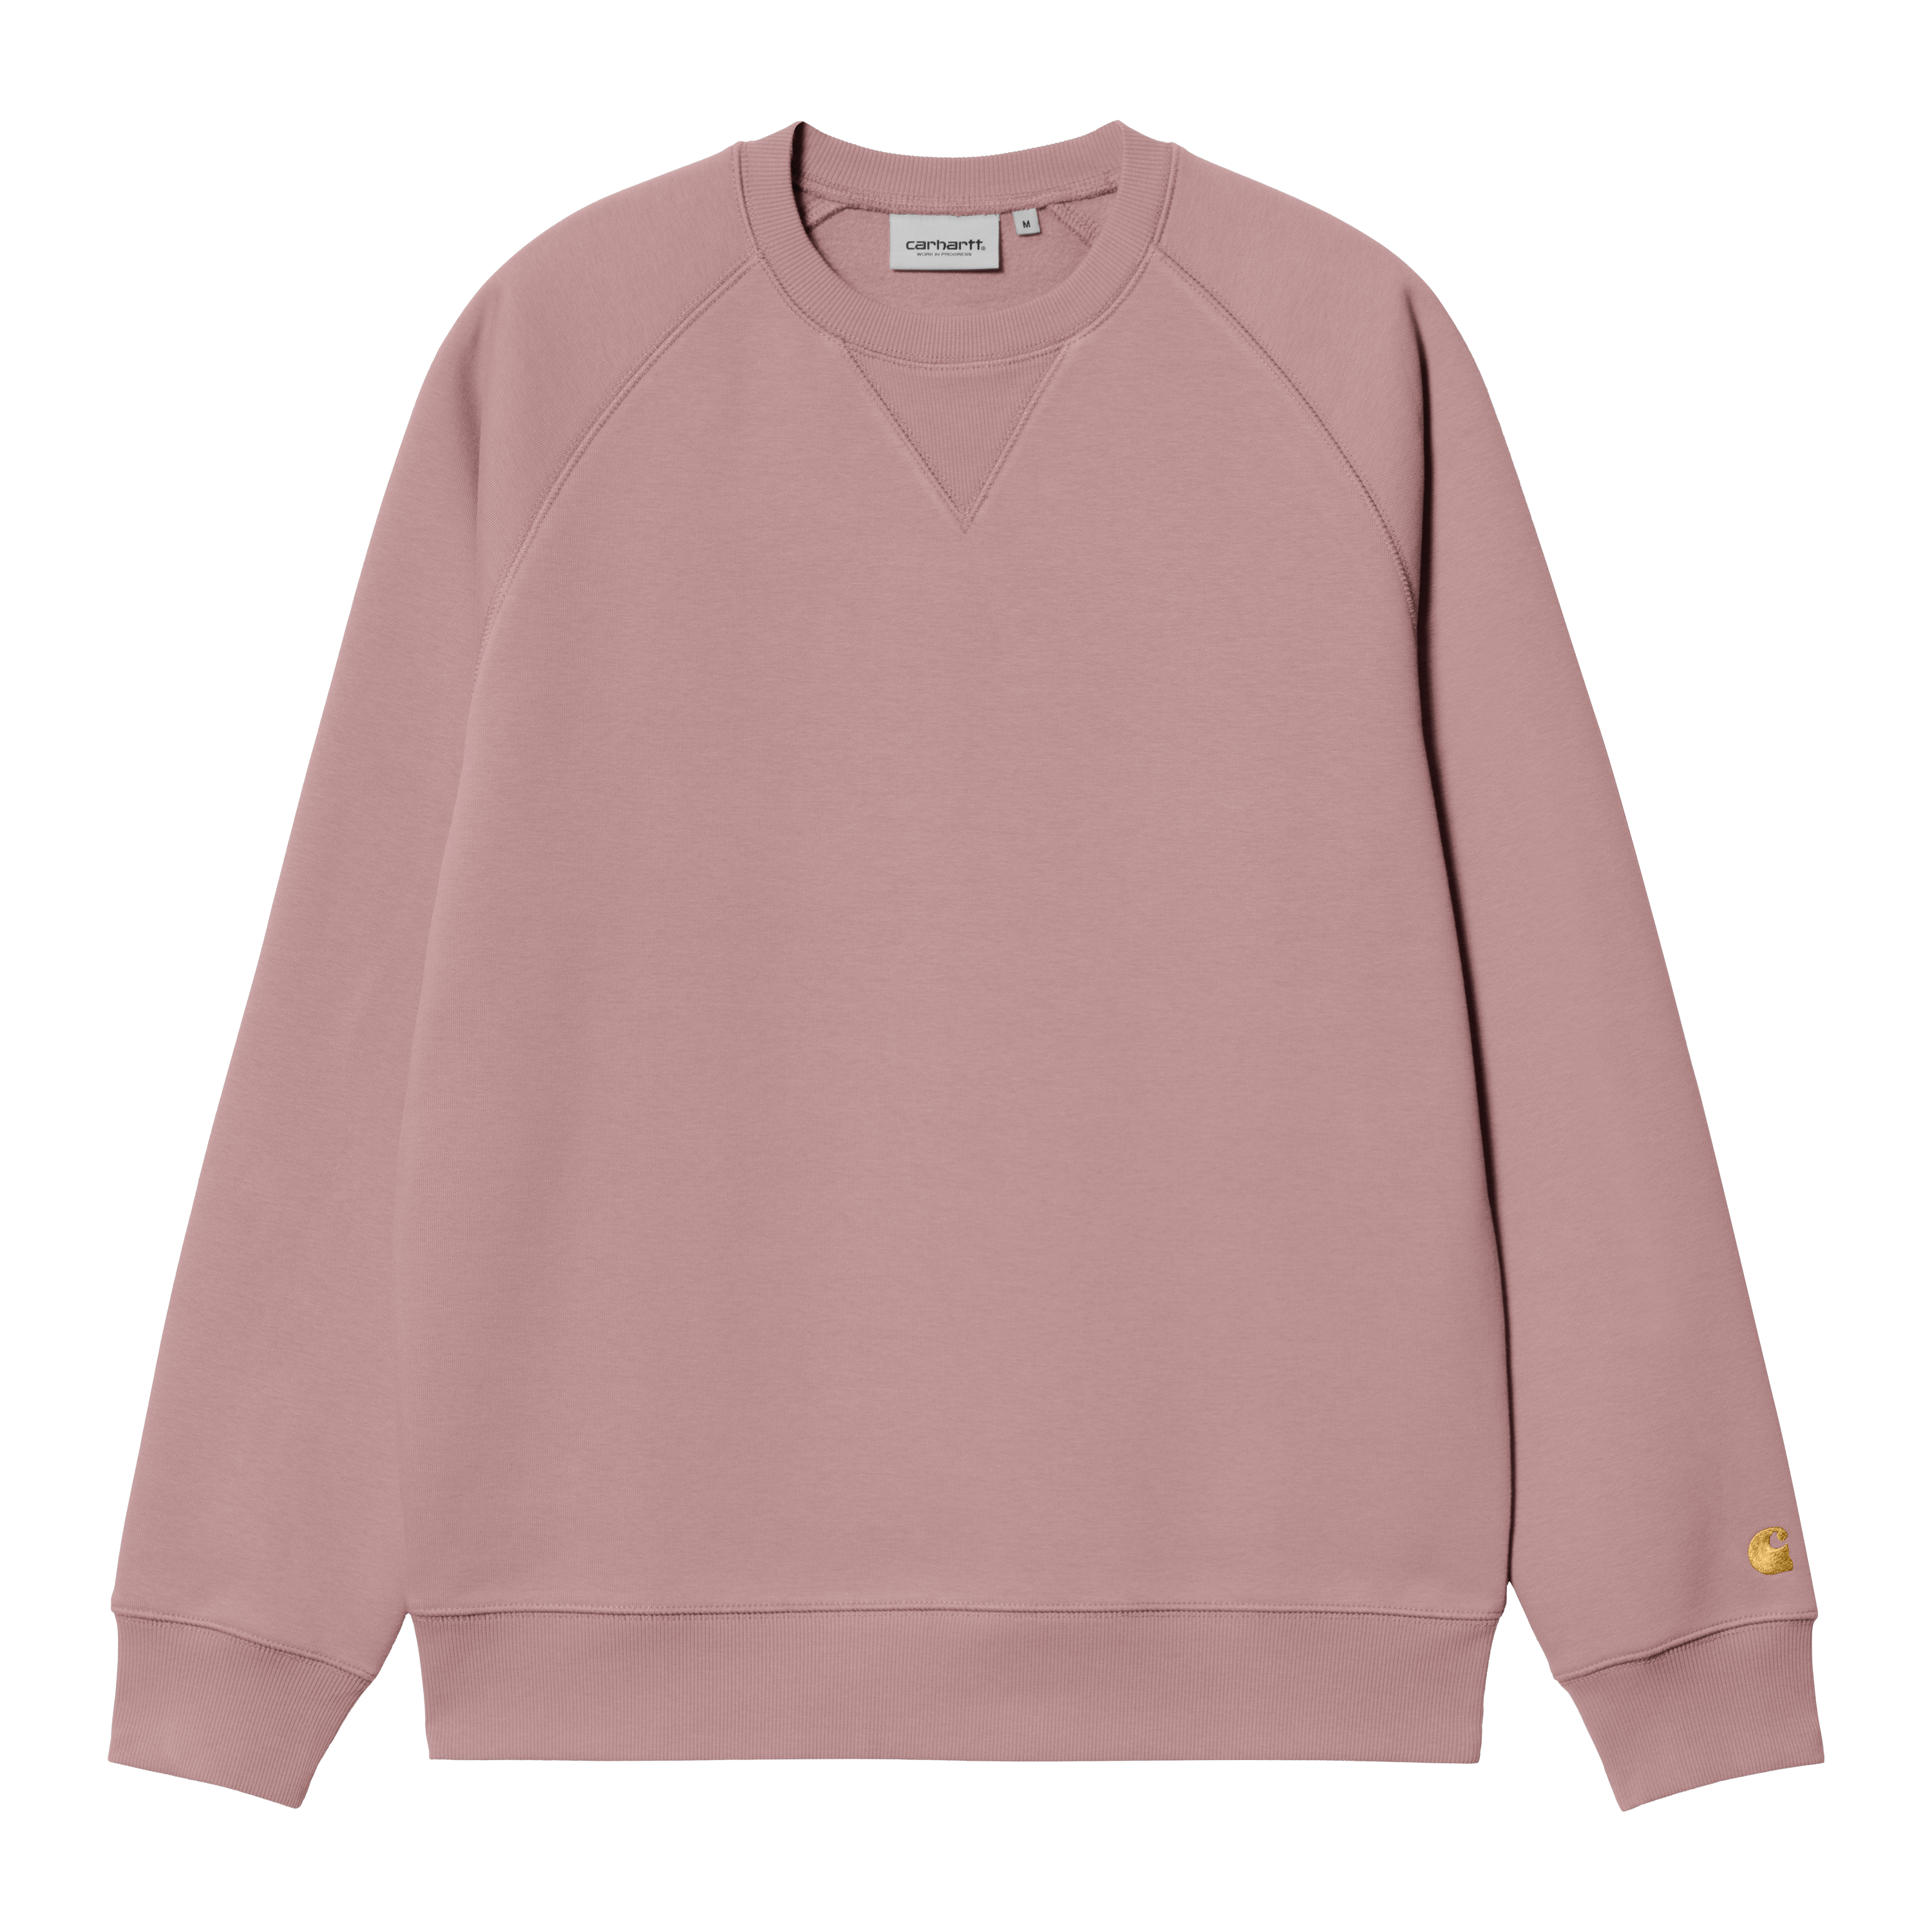 Carhartt WIP - CHASE SWEAT - Glassy Pink/Gold